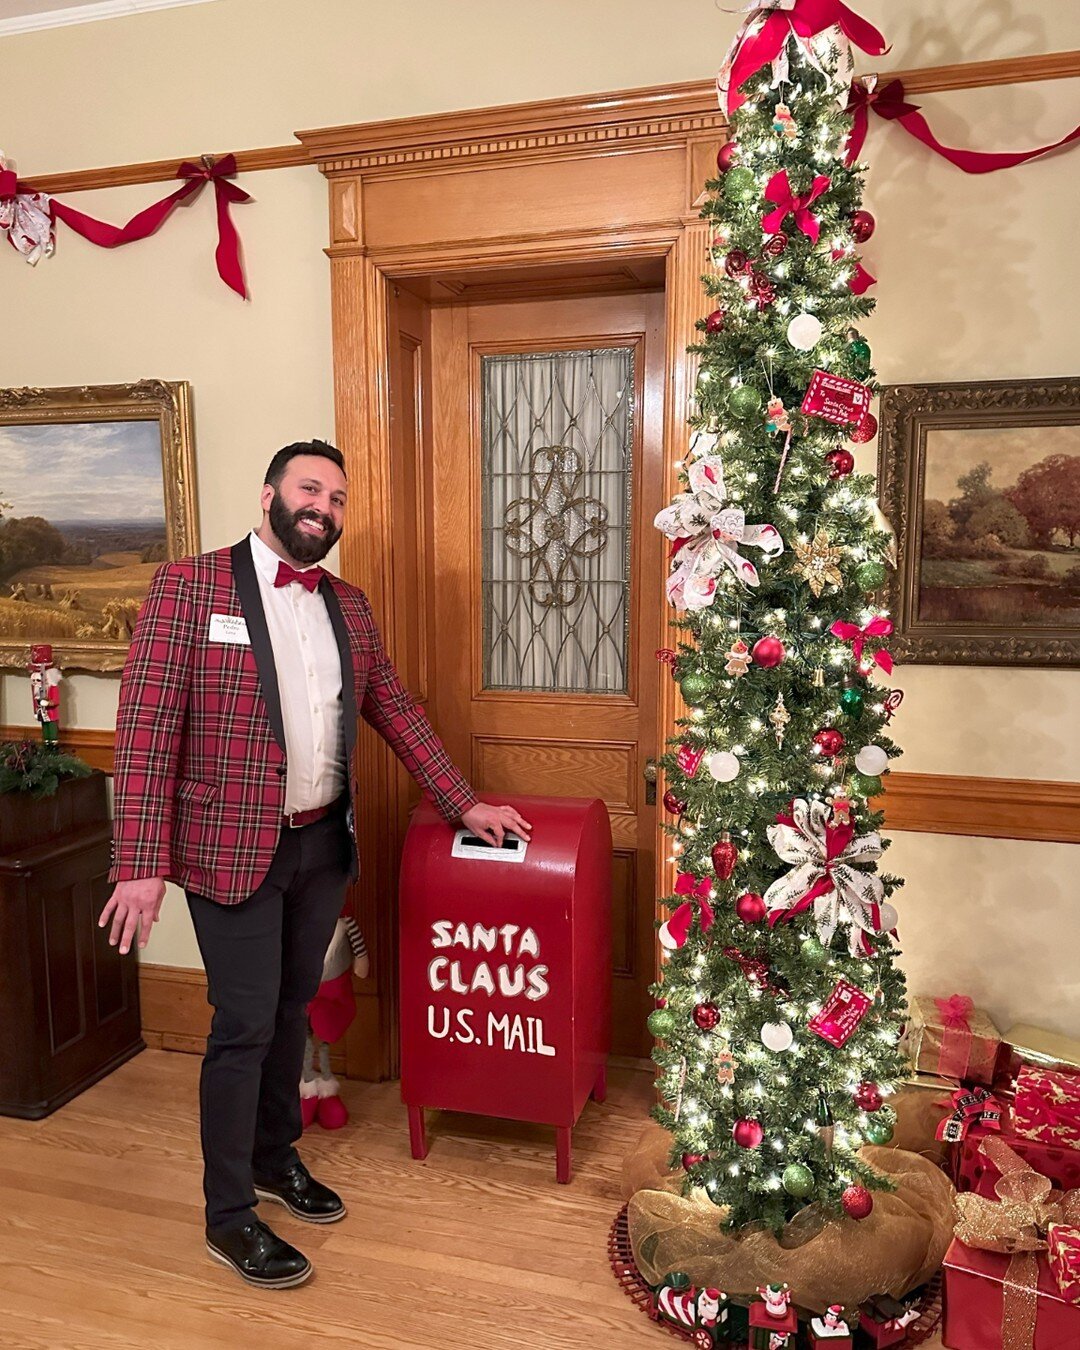 Have you mailed out your letters to Santa yet?  Pedro has and we have a pretty good feeling he is on the Nice List!

Wishing you all a safe and joyous holiday season.

#pedrolimainteriors #mkeinteriordesigners #lakecountrydesign #luxuryhomes #dreamho